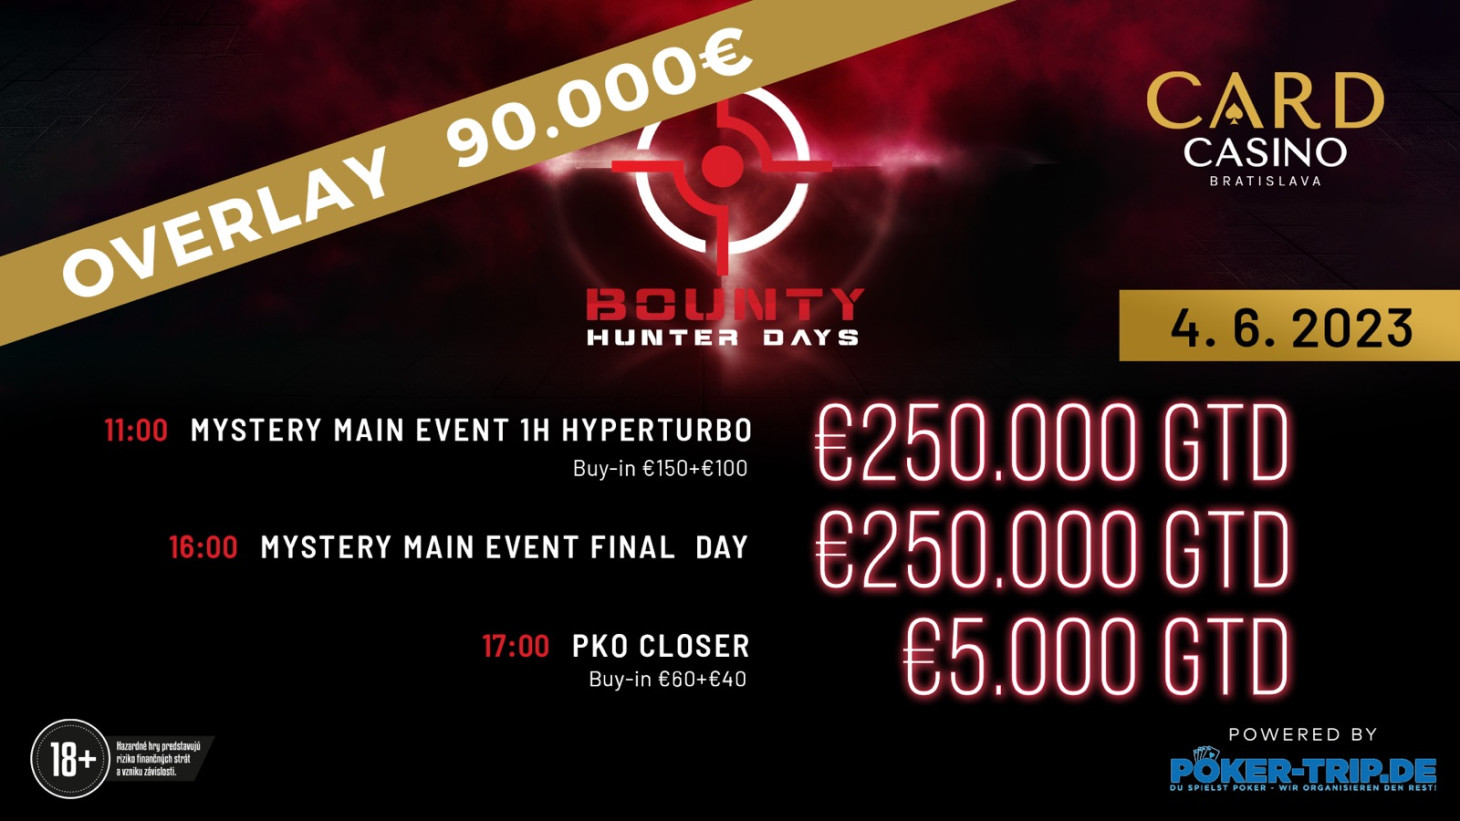 Get ready to 'hunt'. June opens with the €300,000 GTD Bounty Hunter tournament